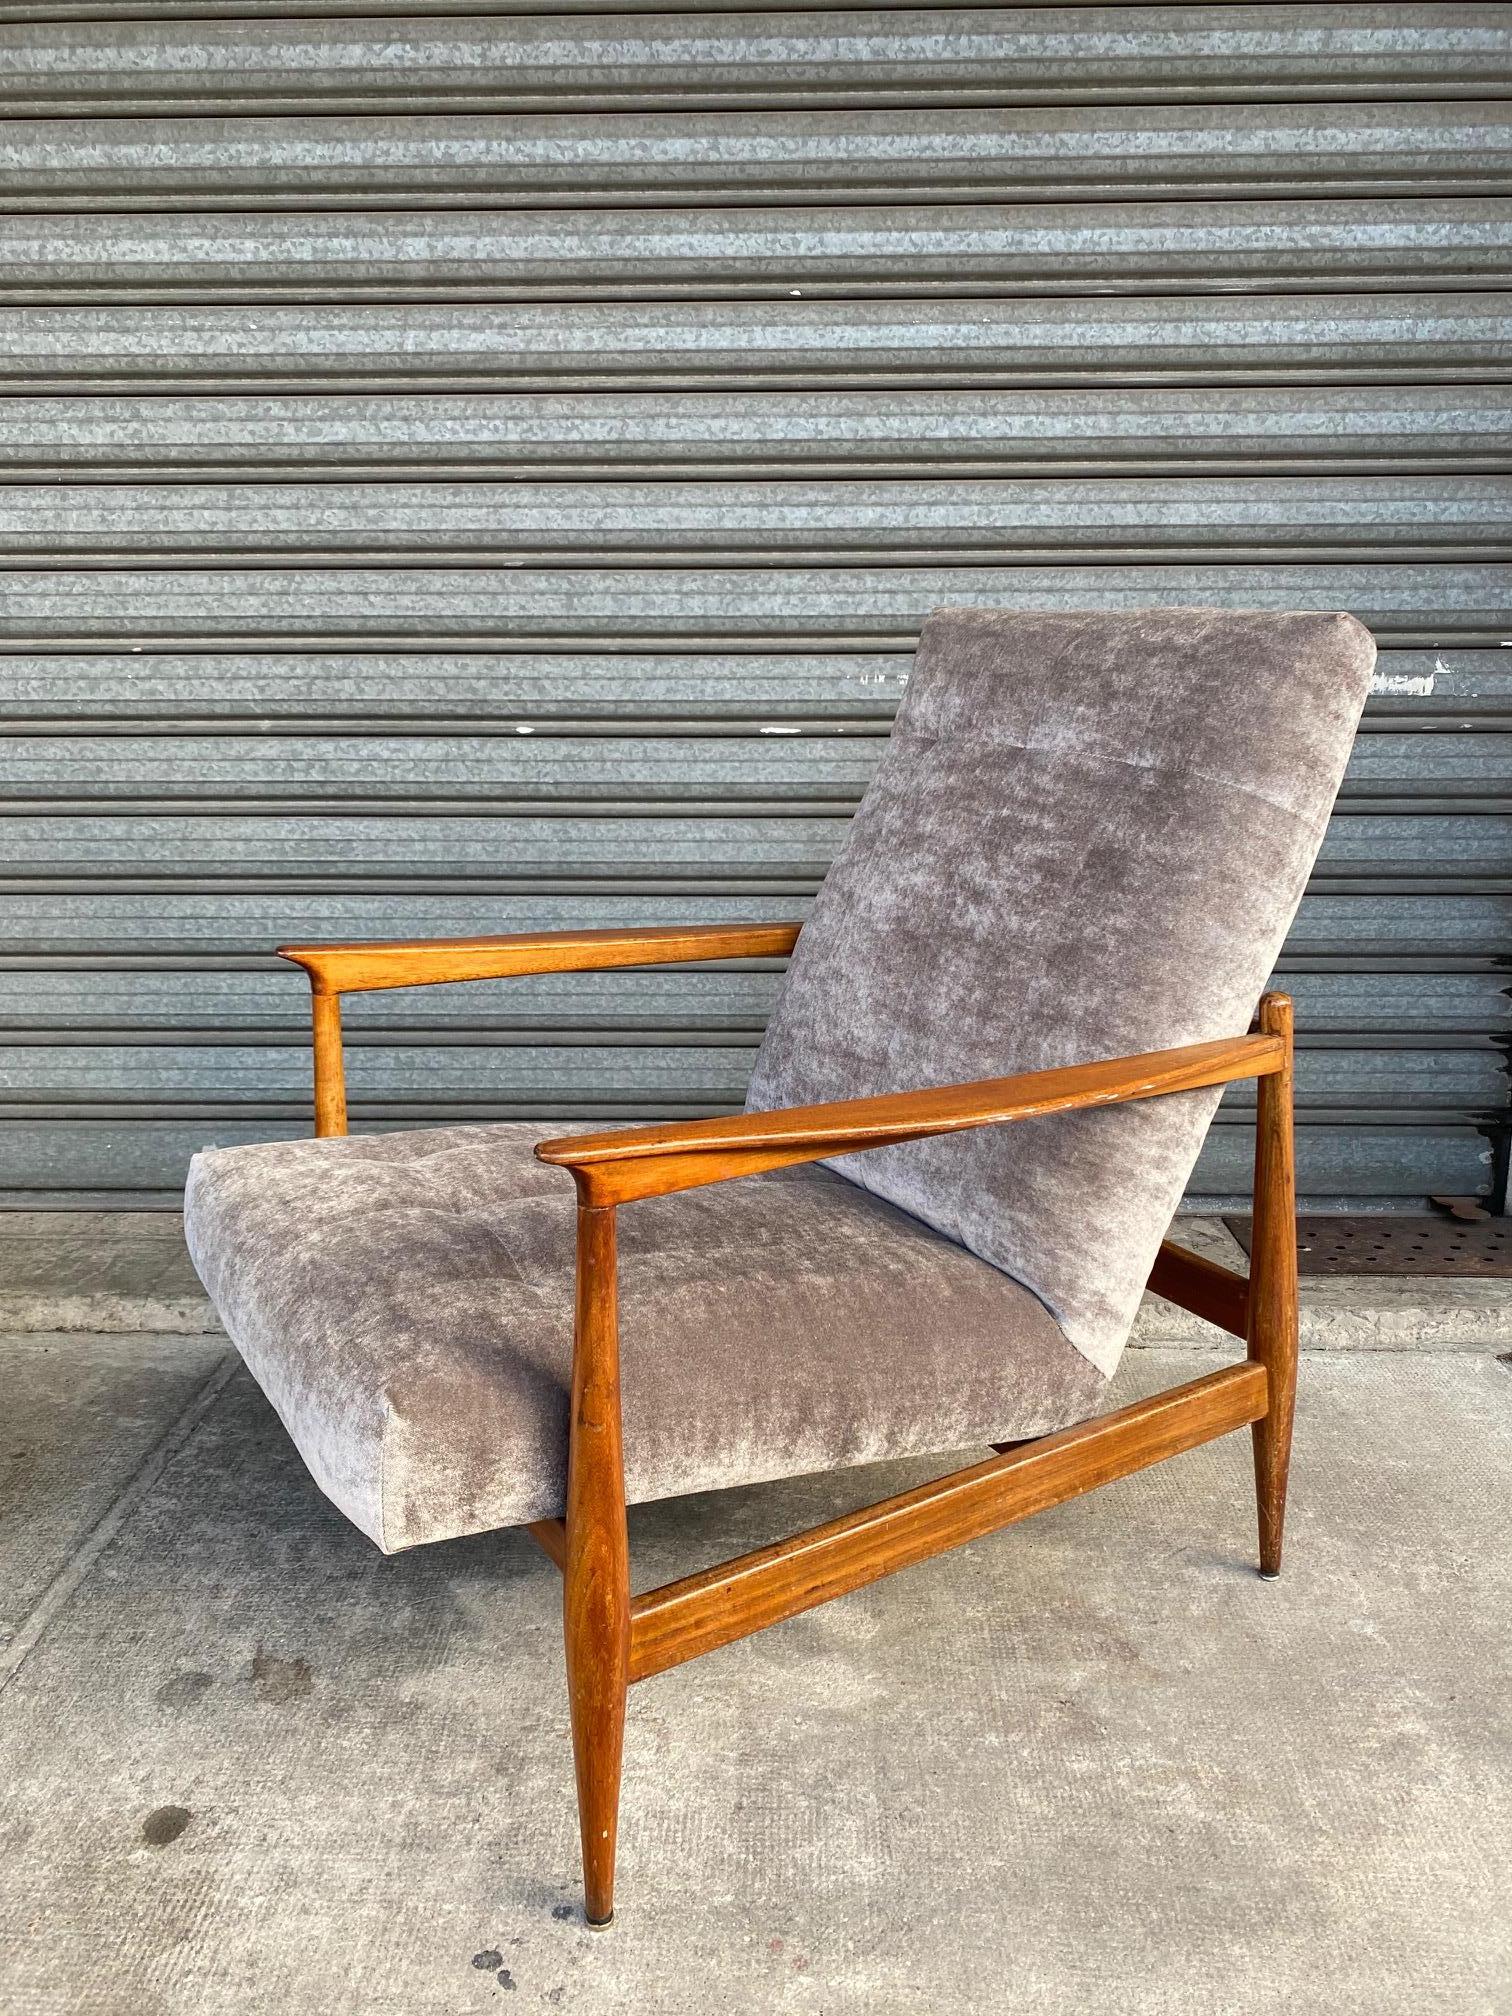 Pair of armchairs, Portugal, 1960s, attributed to Altamira manufacturer, recently reupholstered with a grey velvet.